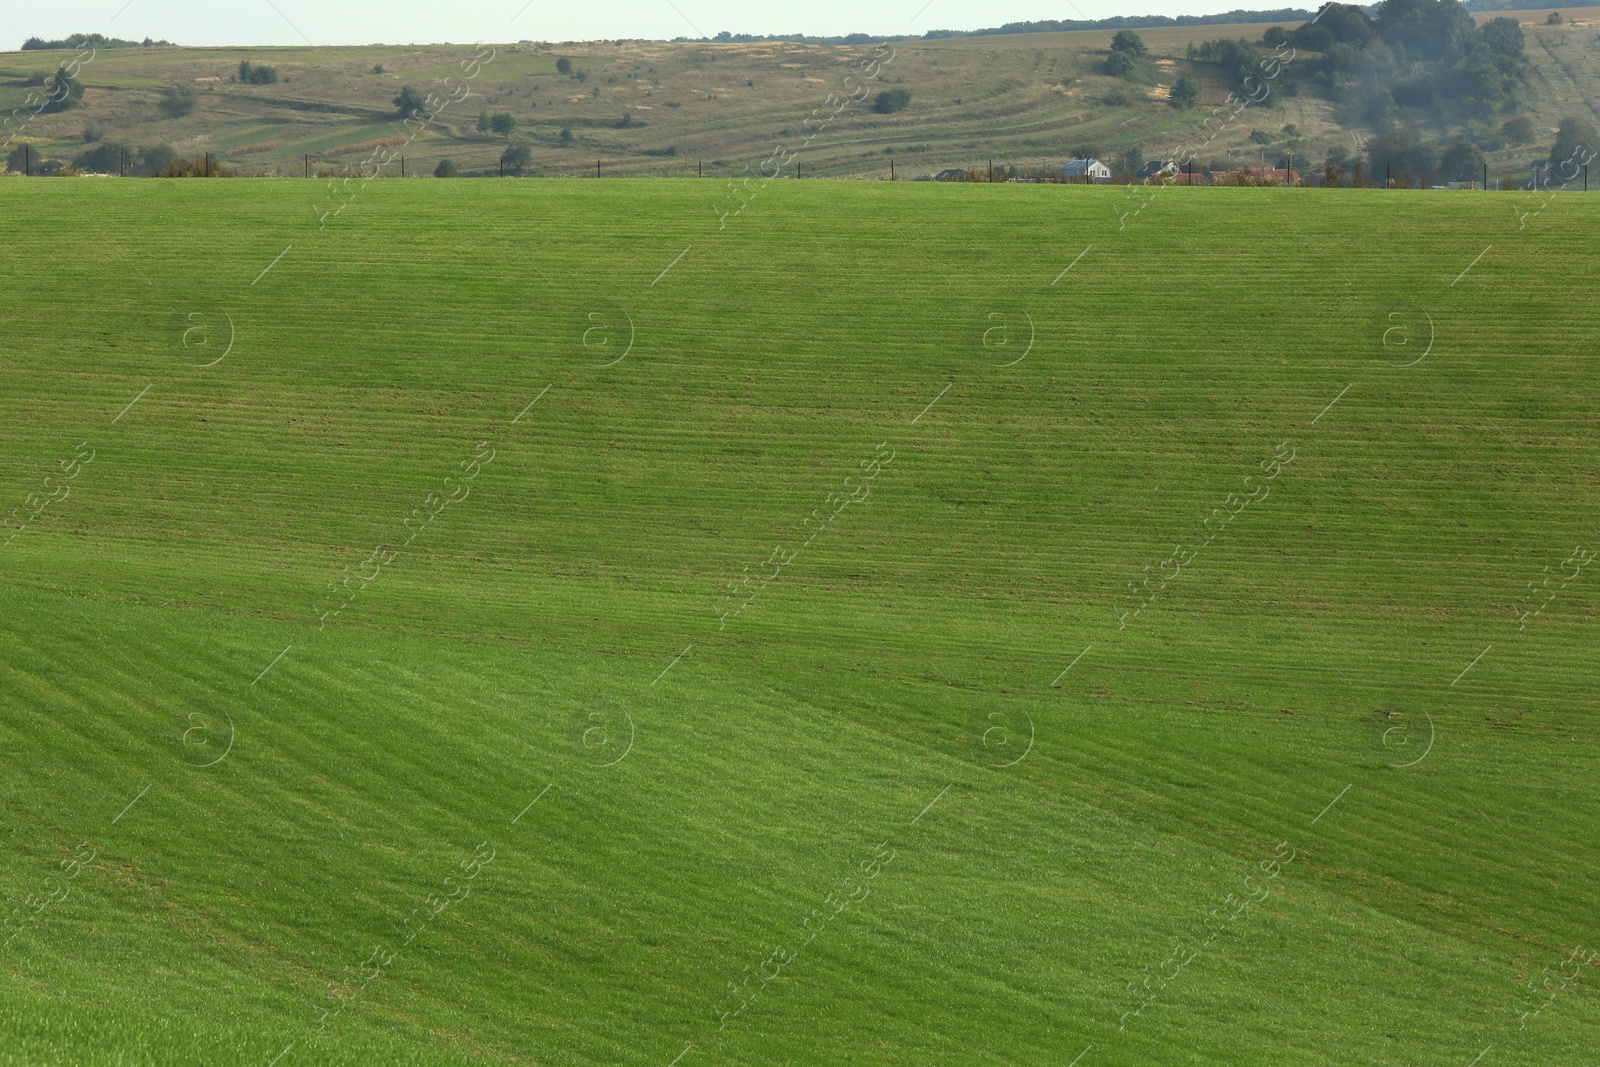 Photo of Beautiful lawn with bright green grass outdoors